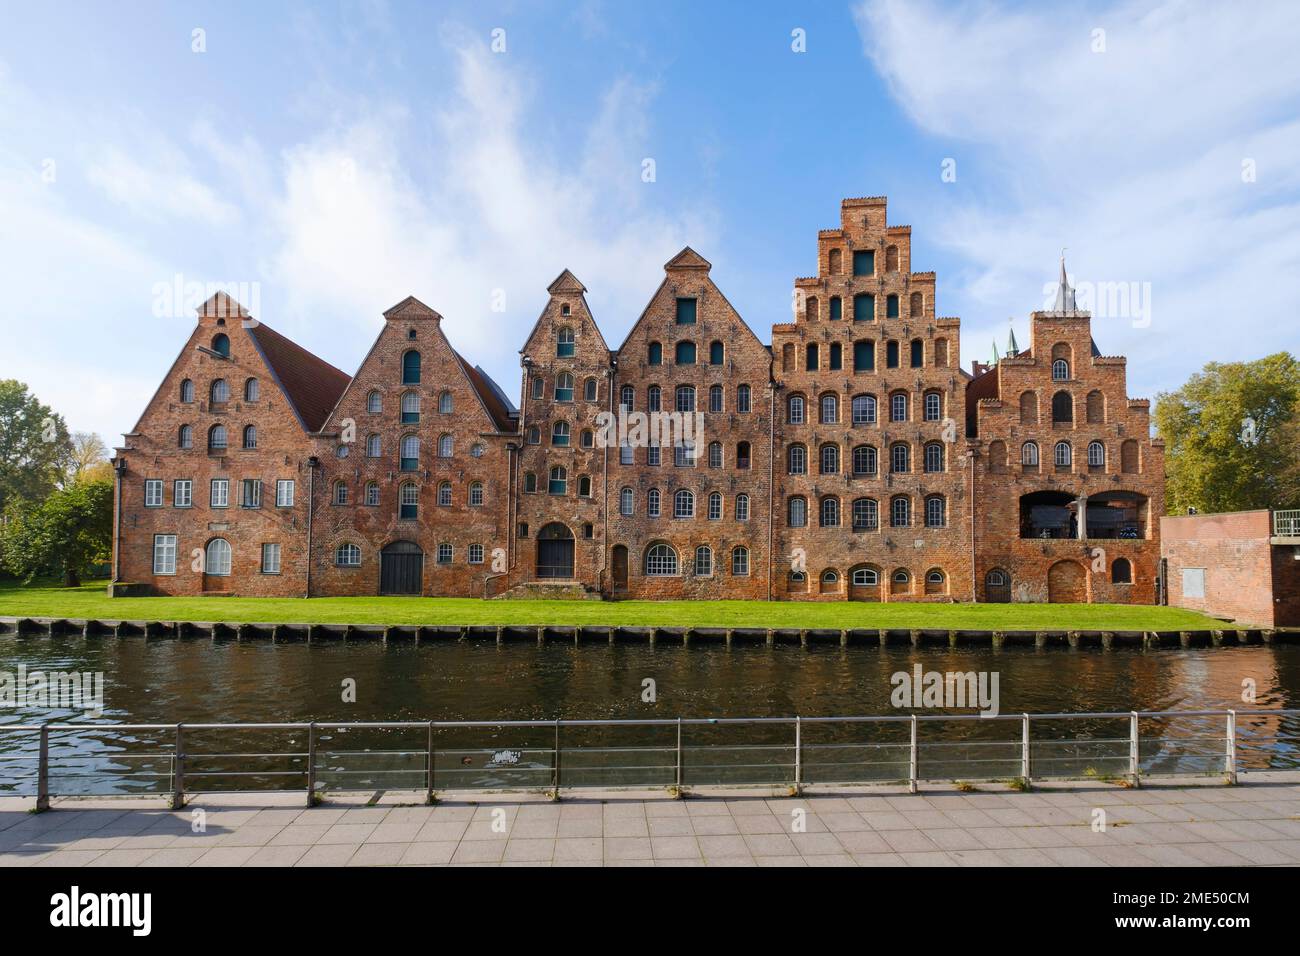 Germany, Schleswig-Holstein, Lubeck, Historic warehouses on bank of river Trave Stock Photo